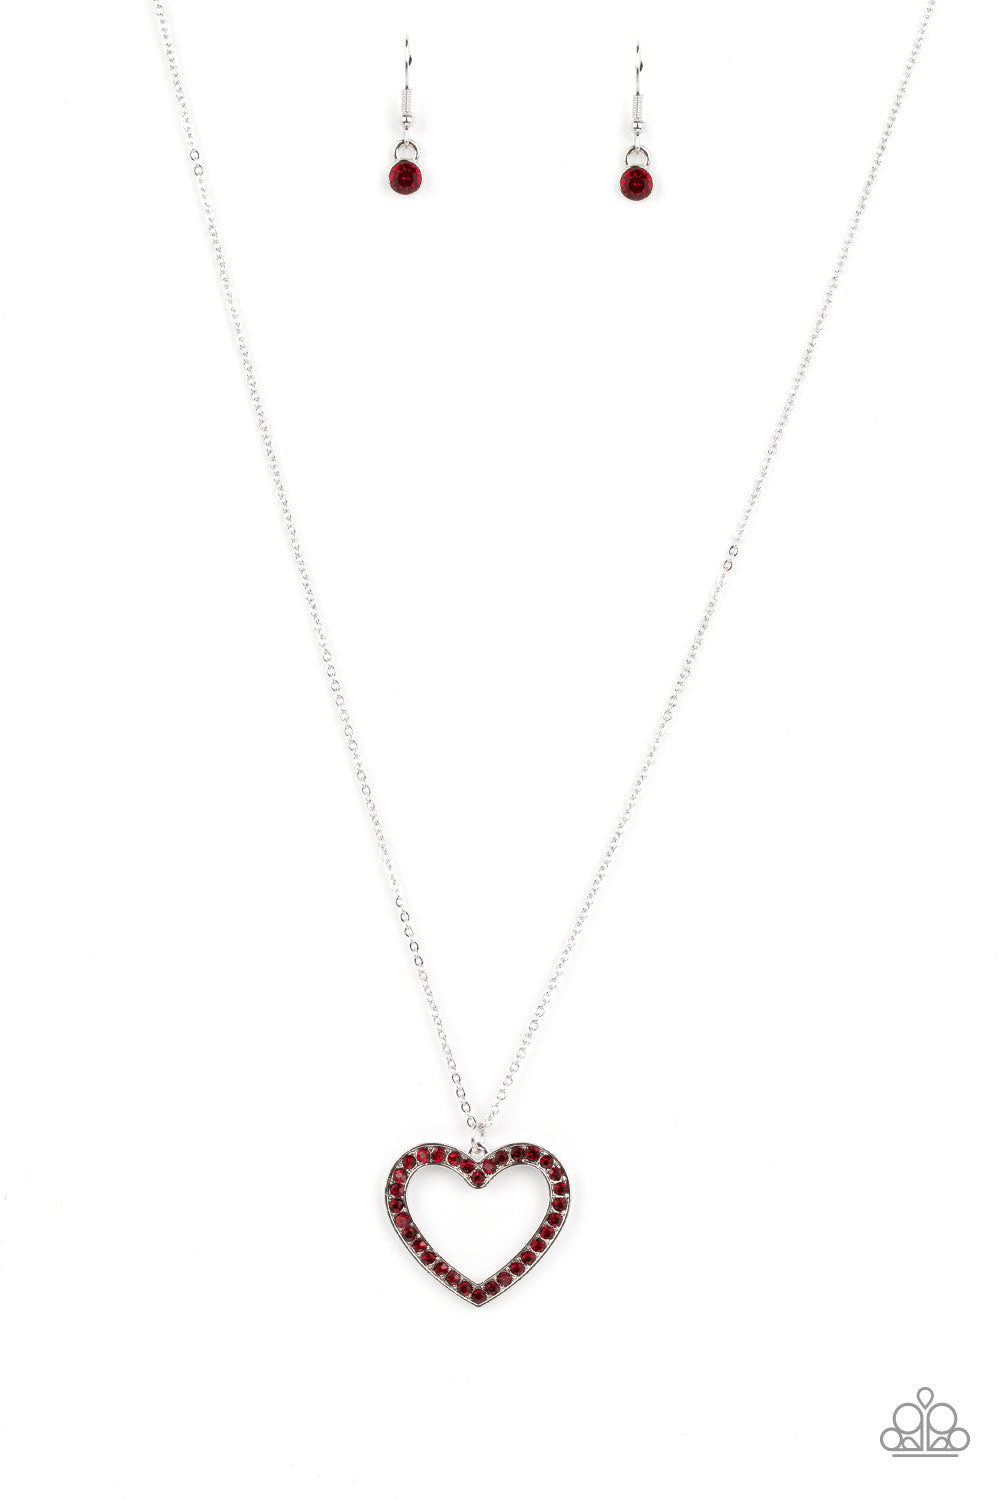 Dainty Darling - Red Heart Necklace - Paparazzi Accessories - Alies Bling Bar